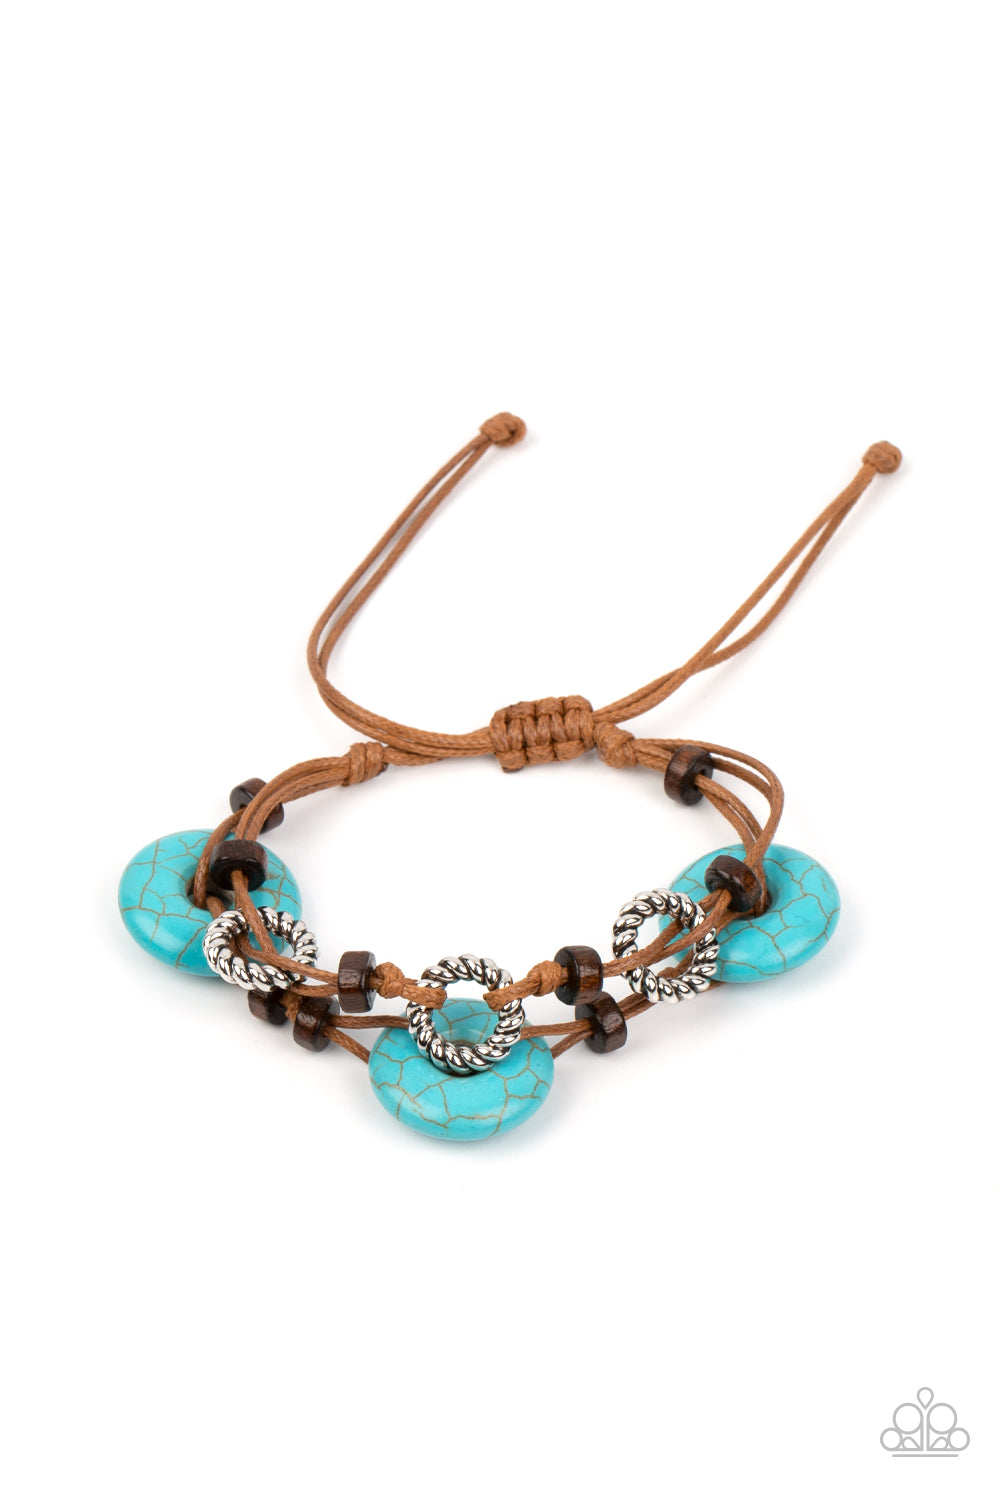 Quarry Quandary - Blue/Turquoise Stone, Wooden Beads, & Textured Silver Rings Paparazzi Bracelet